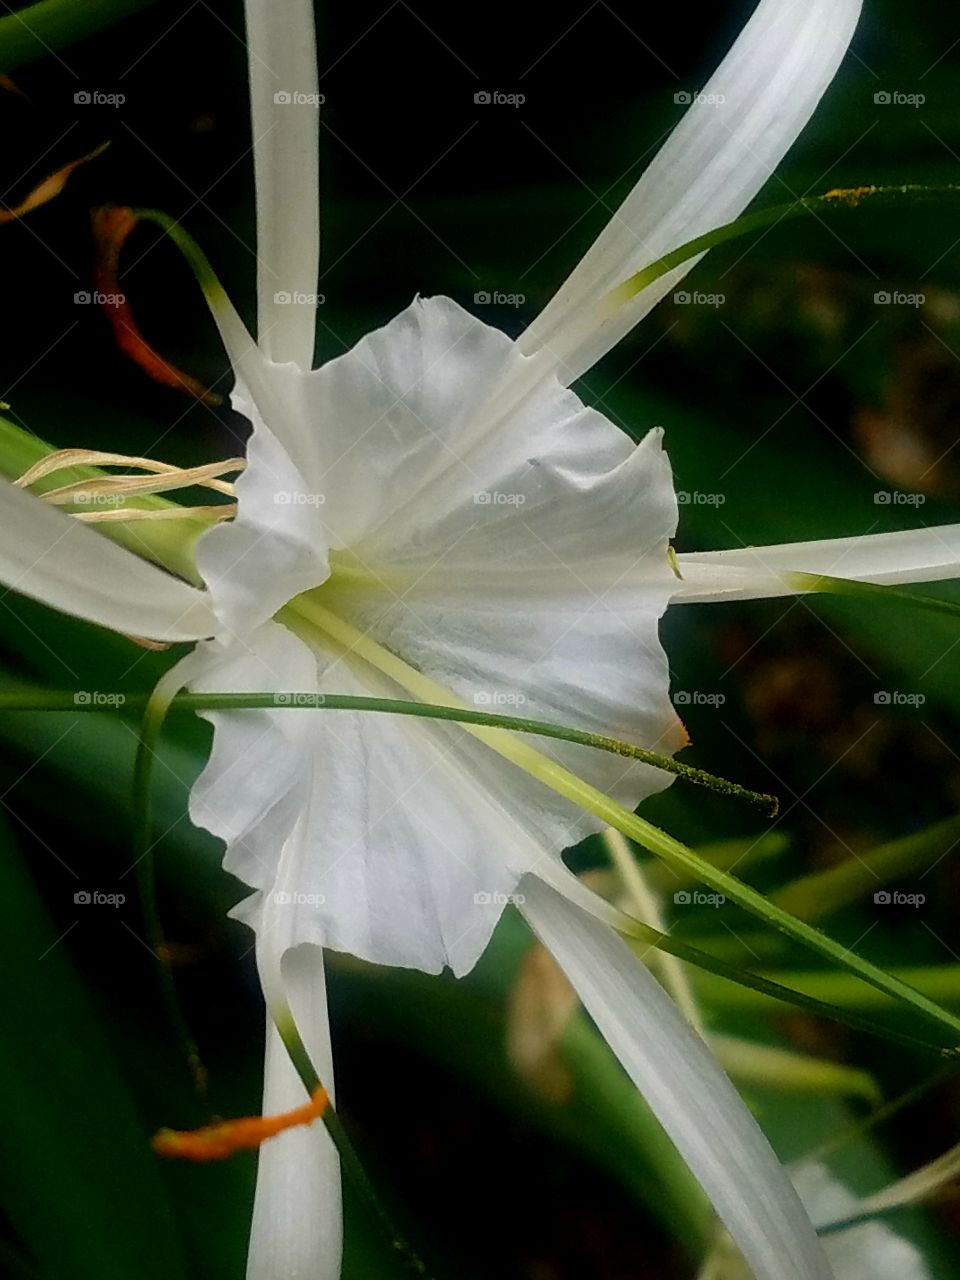 Spider Lily in Bloom